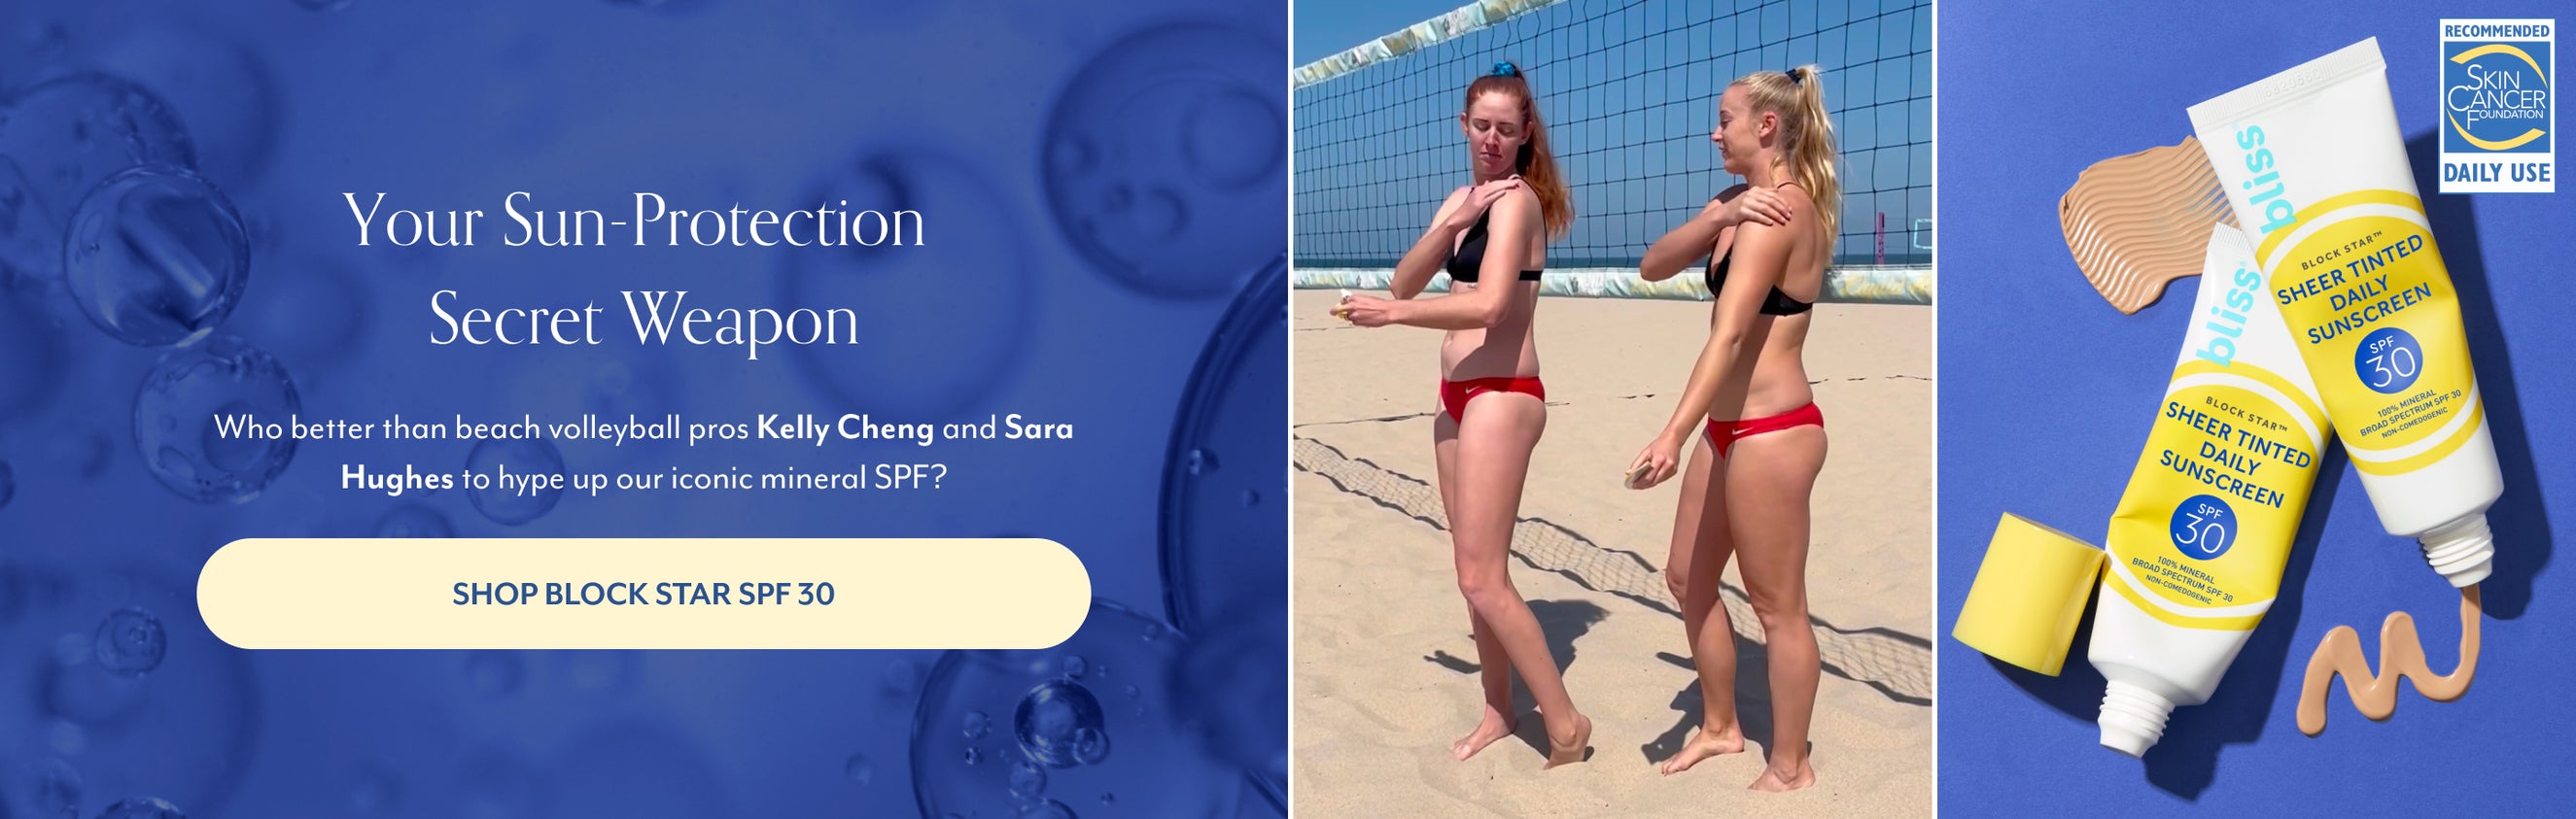 Your Sun-Protection Secret Weapon. Who better than beach volleyball pros Kelly Chung and Sara Hughes to hype up our iconic mineral SPF?